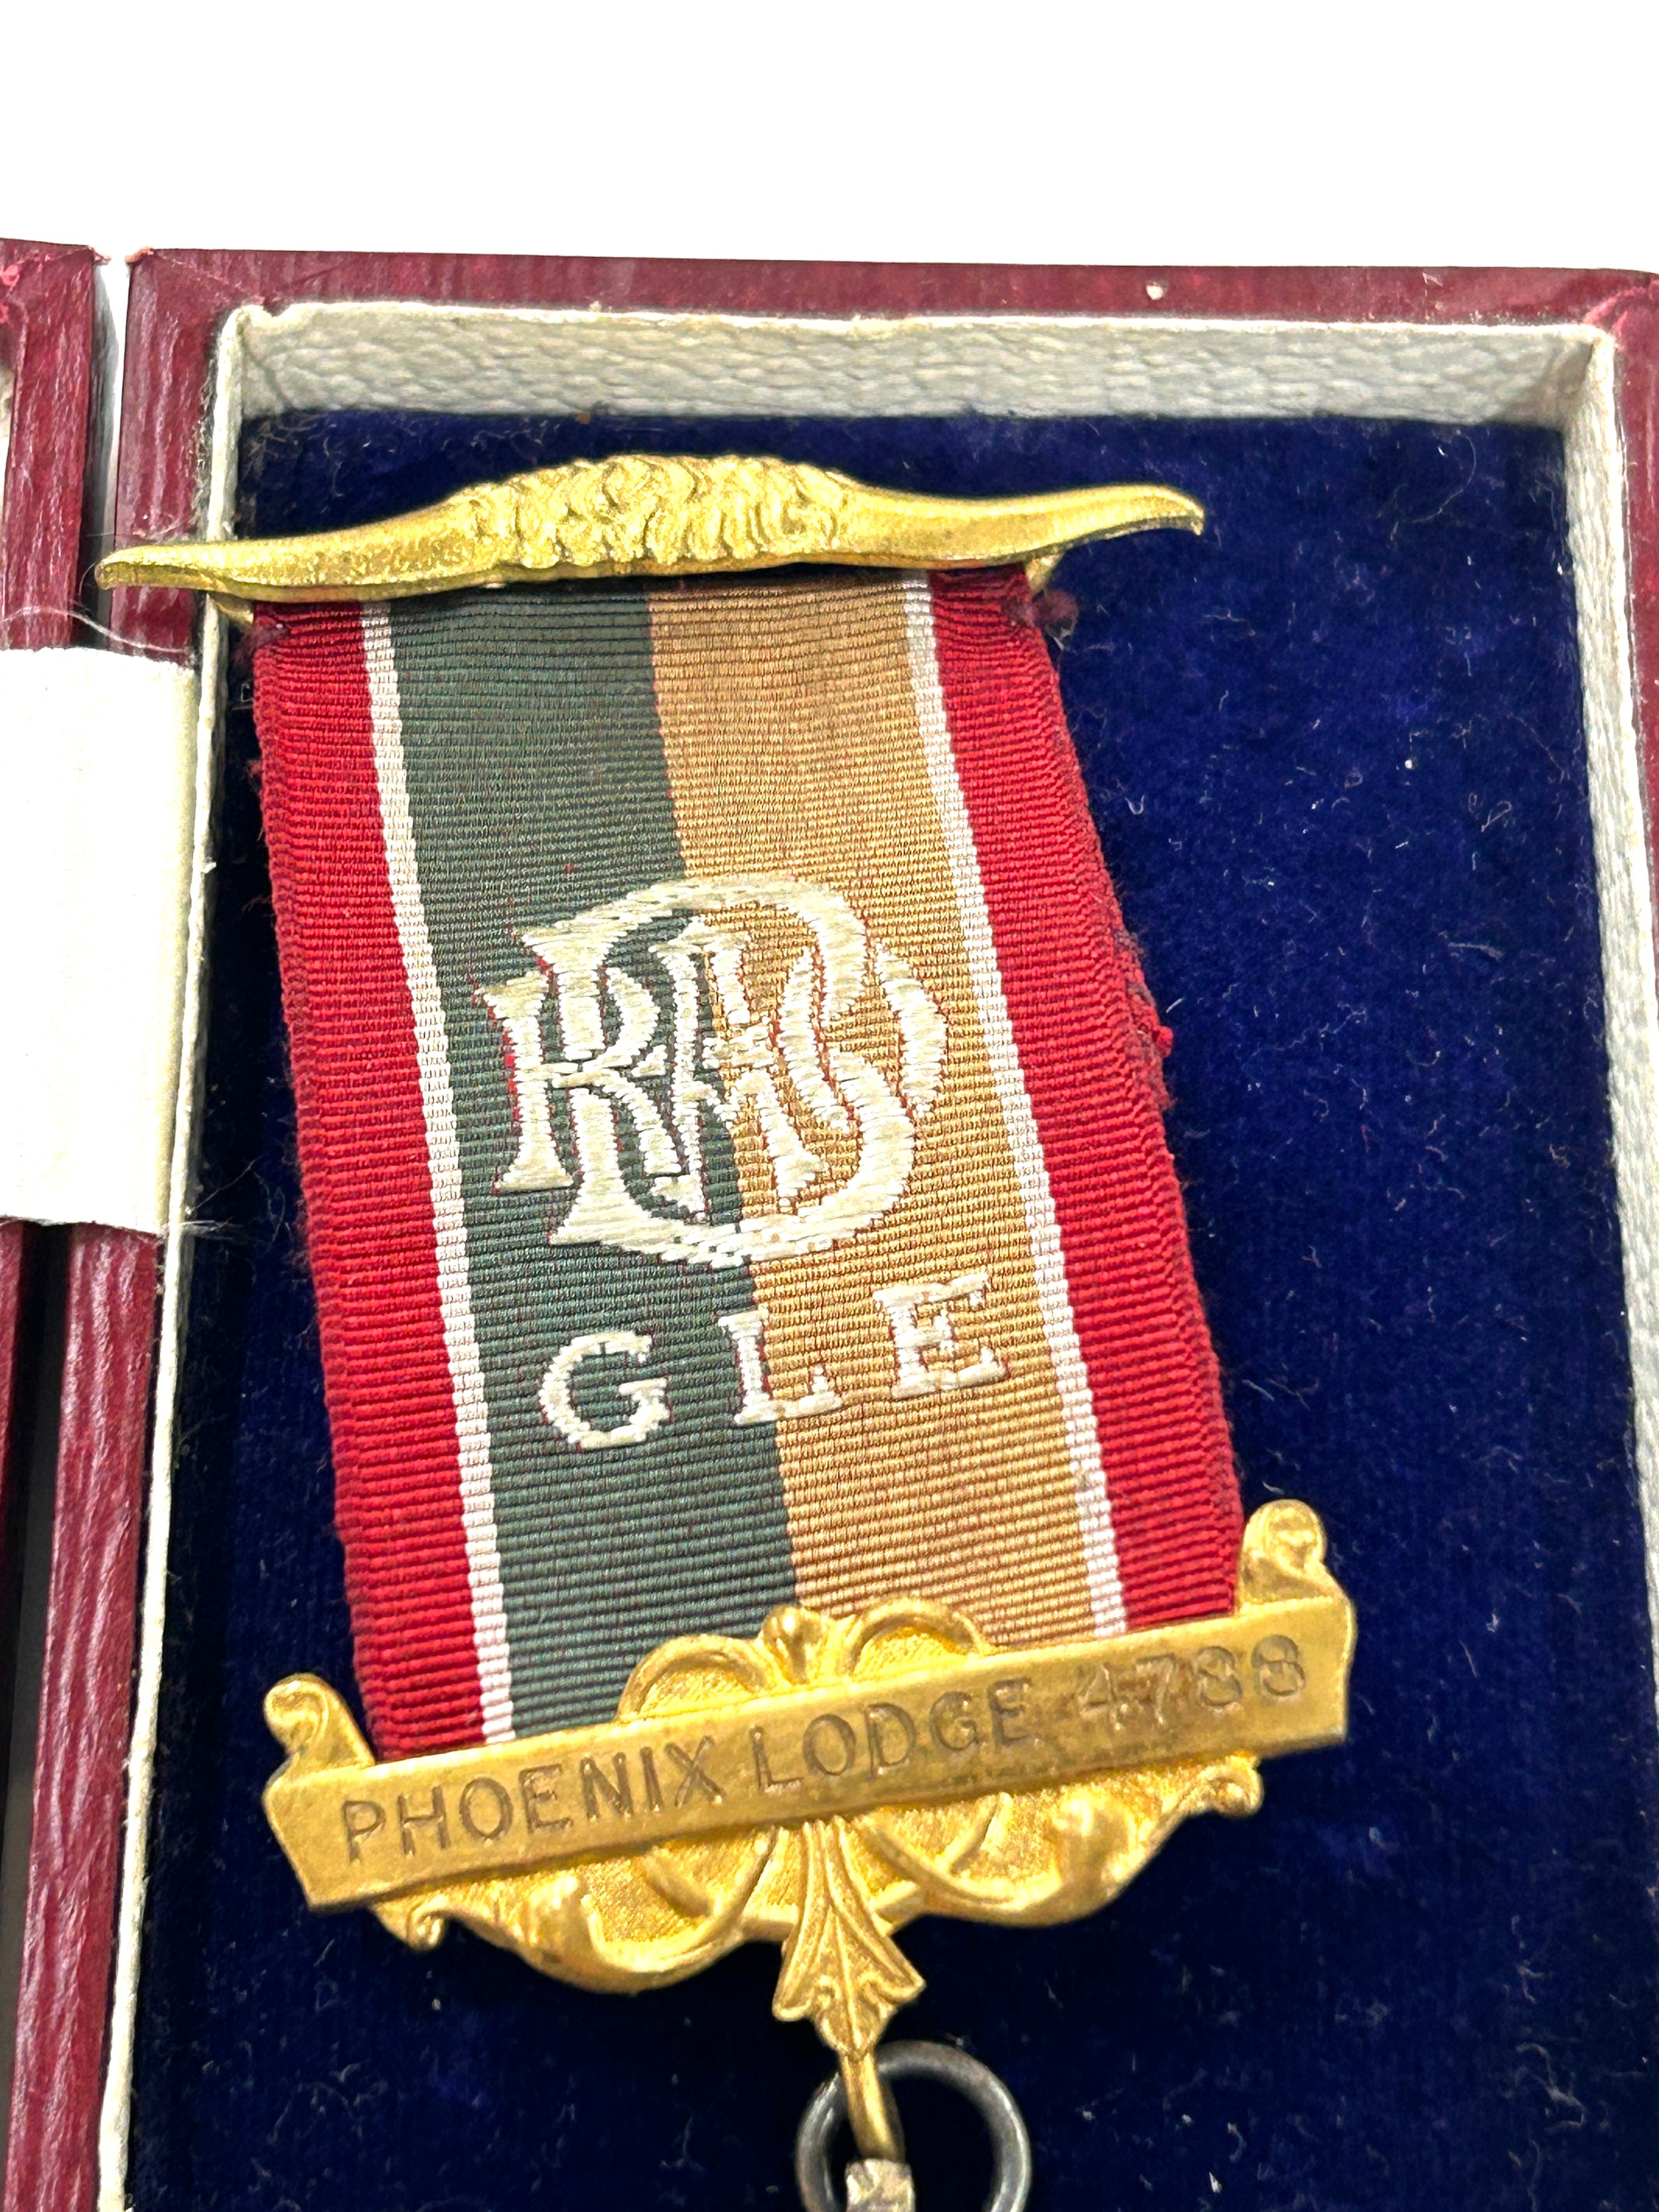 Boxed masonic silver service rendered medal june 29th 1928 presented to Bro E. Baisden by the - Image 3 of 5